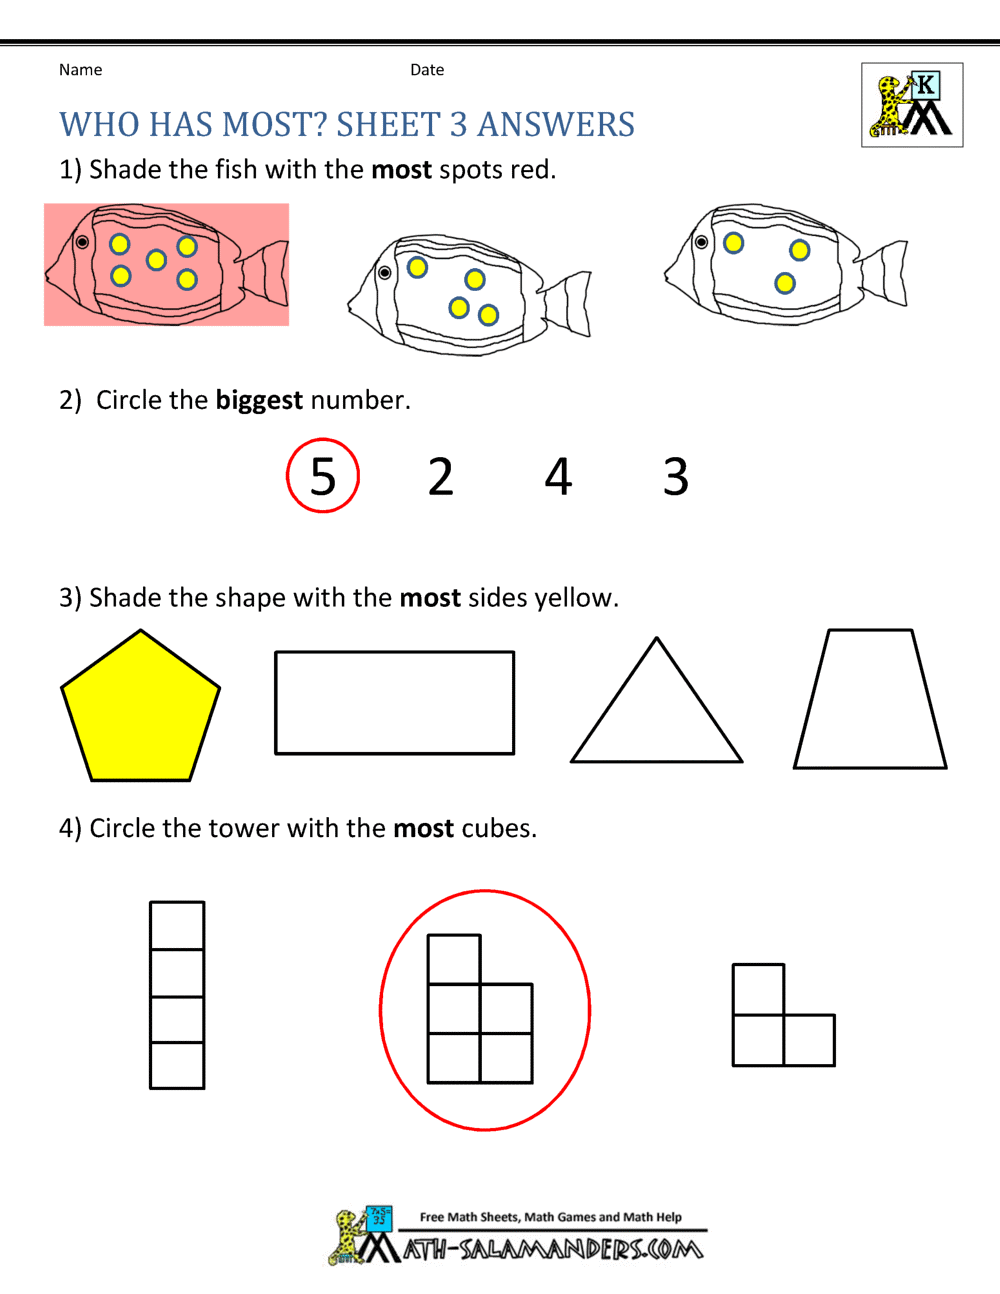 Printable Kindergarten Math Worksheets Comparing Numbers and Size